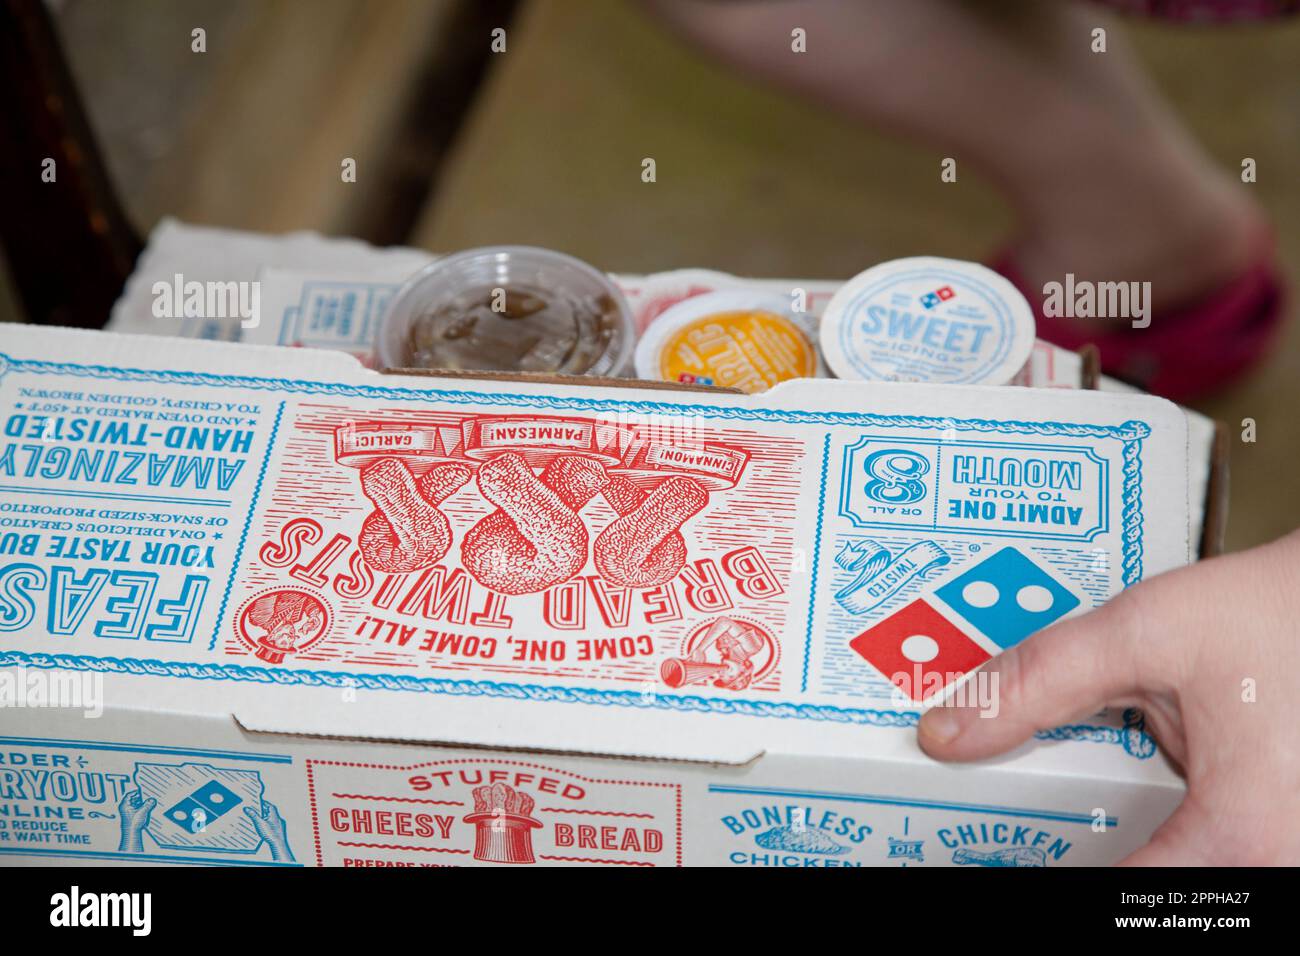 Dominos Delivery Boxes Stock Photo